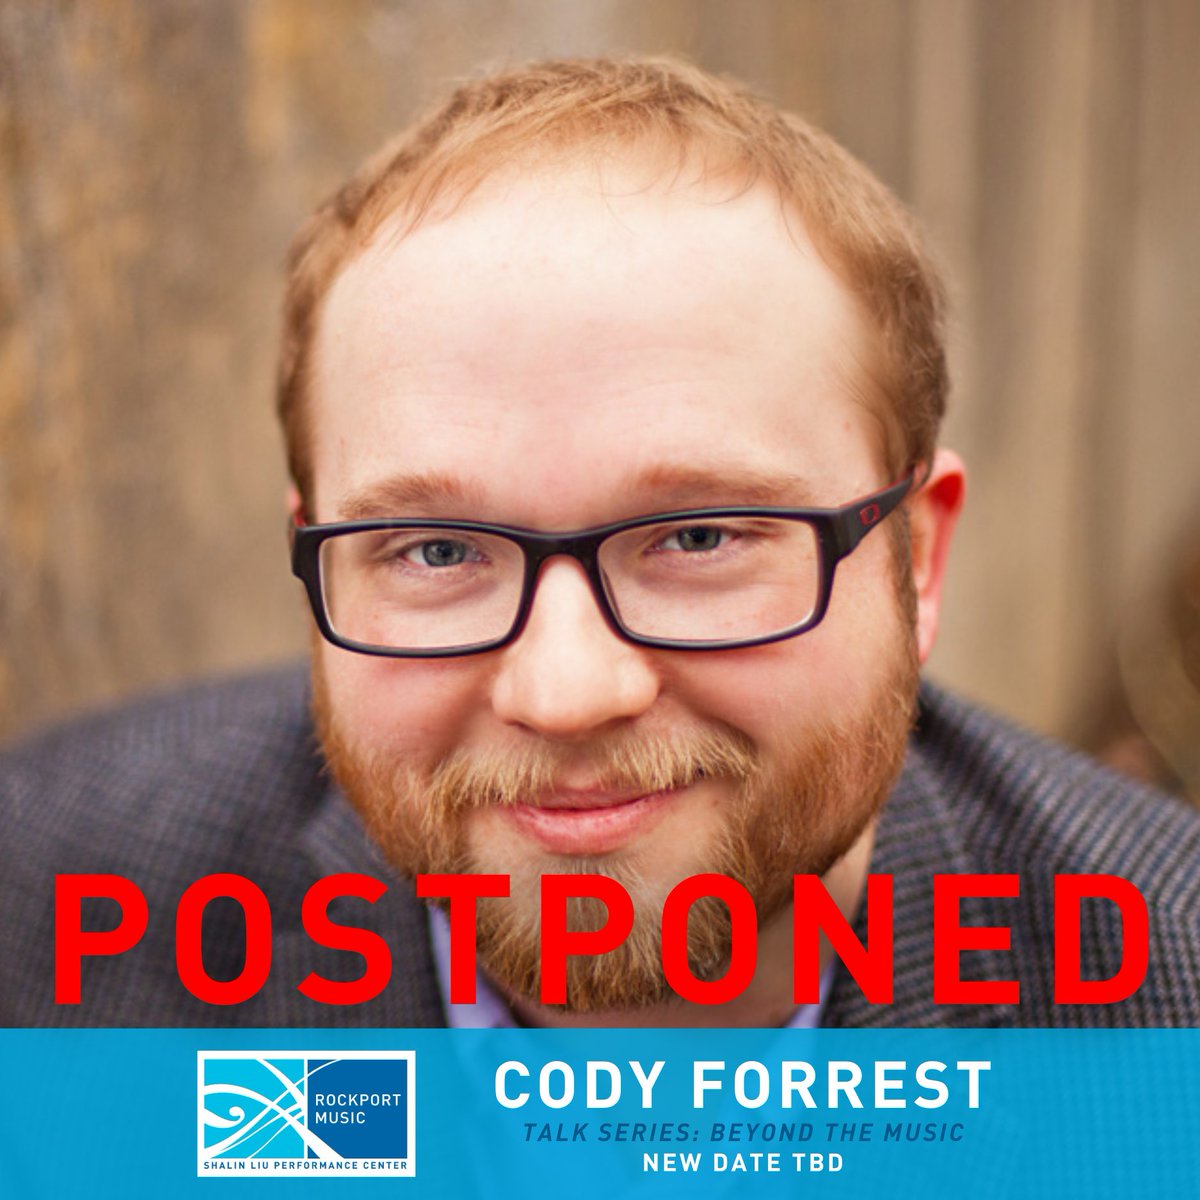 We're sorry to announce that Cody Forrest's 'Beyond the Music' talk, originally scheduled for Tuesday, Jan. 23 at 7 PM, has been postponed due to unforeseen circumstances. The new date is to be decided. About 'Beyond the Music': rockportmusic.org/talk-series/